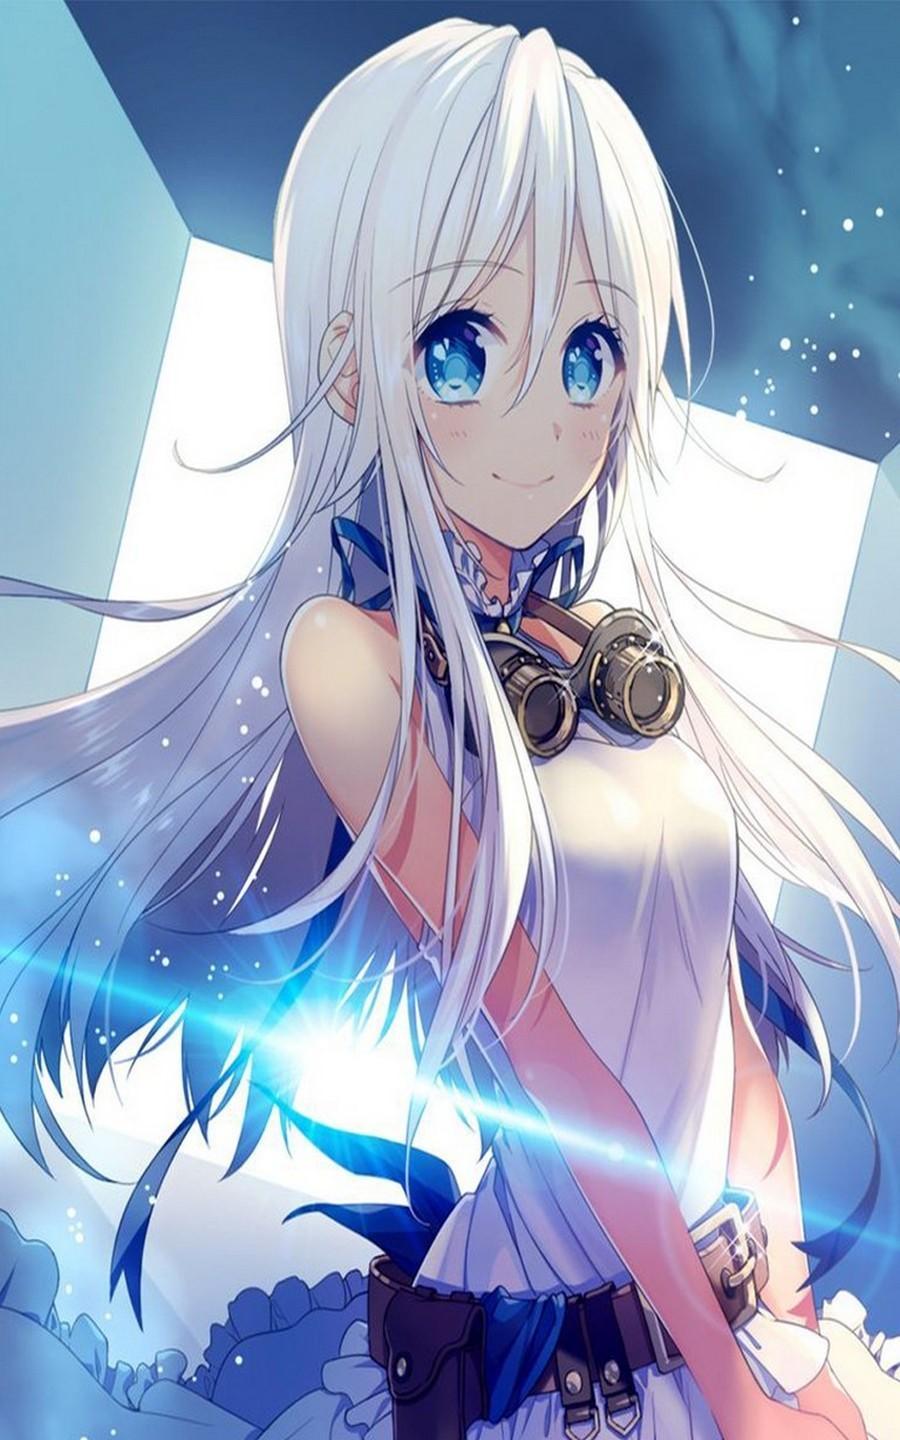 Cute Anime Girl Wallpaper For Android Apk Download - cute anime girl 3 roblox